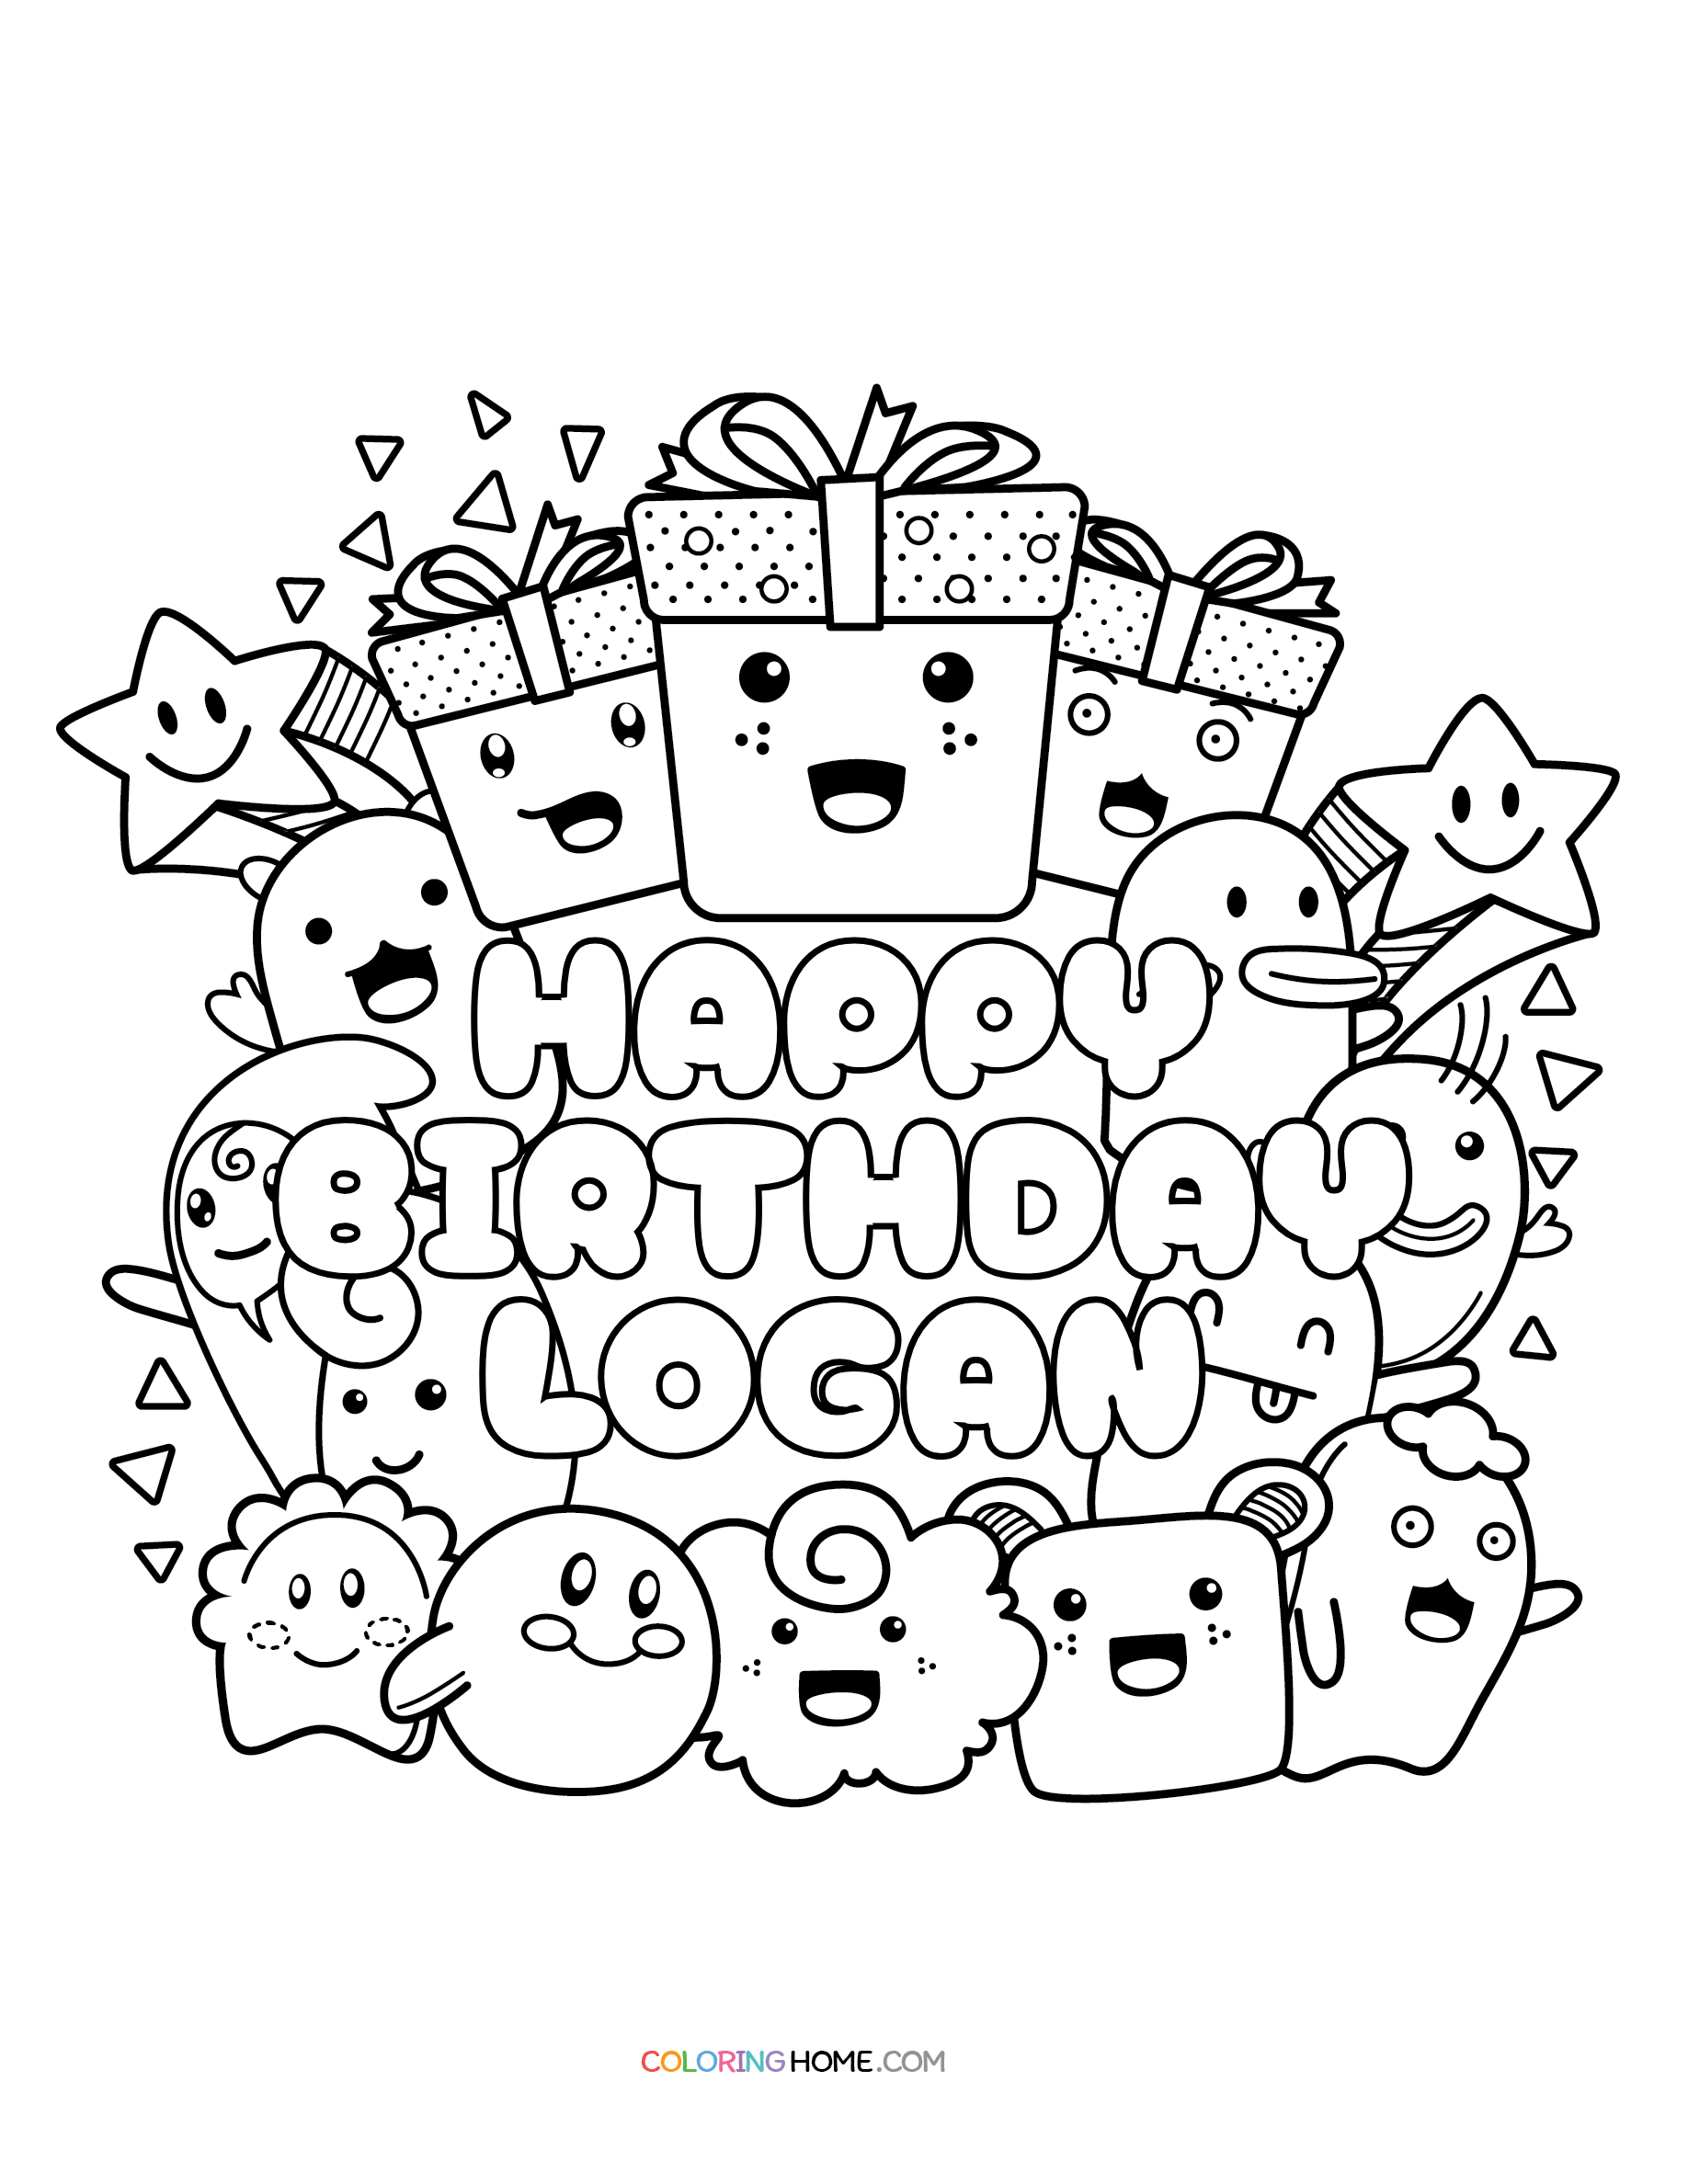 Logan Name Coloring Pages - Coloring Nation